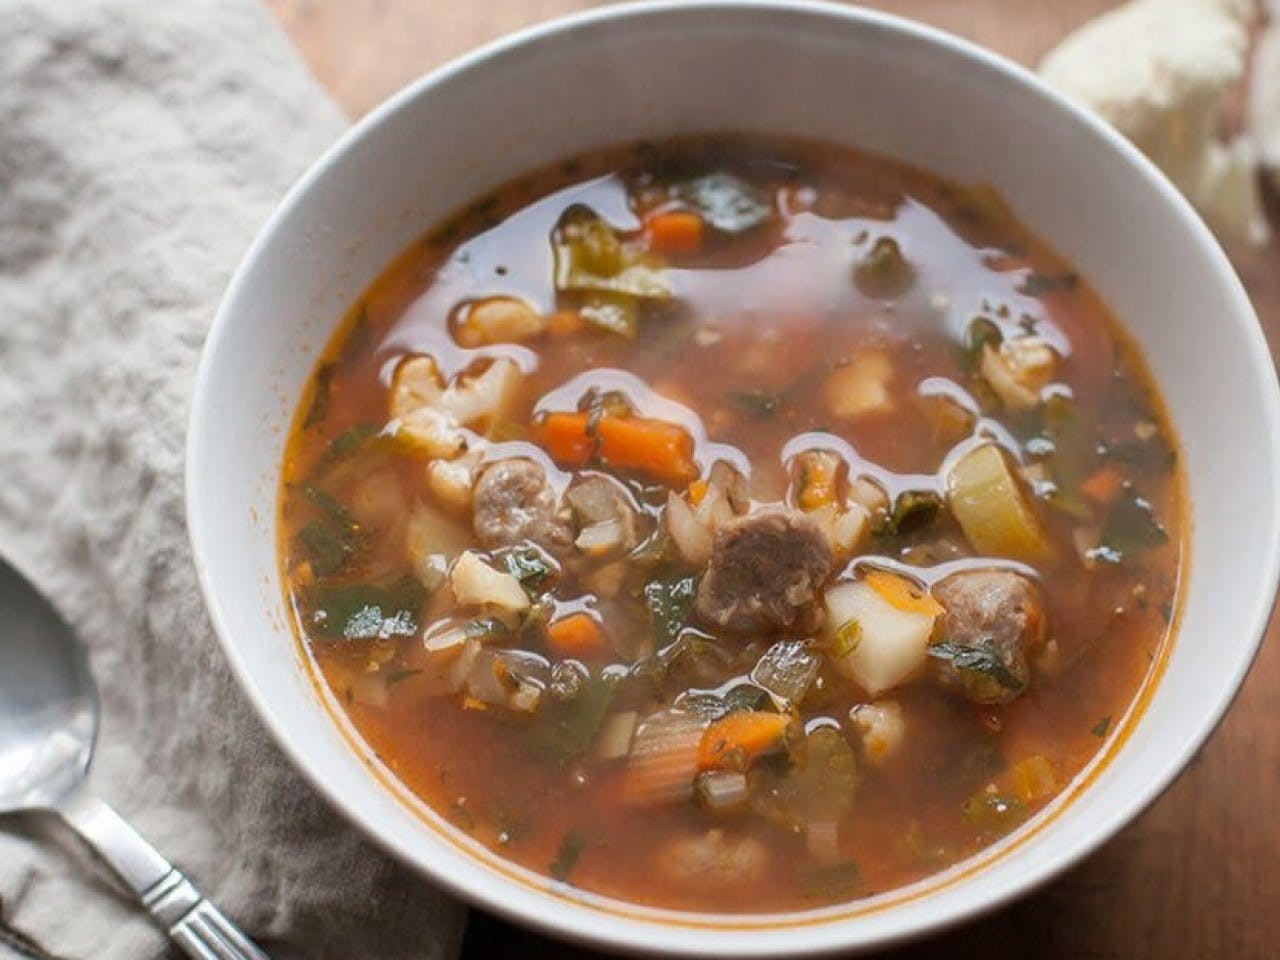 Spicy wintery vegetable soup